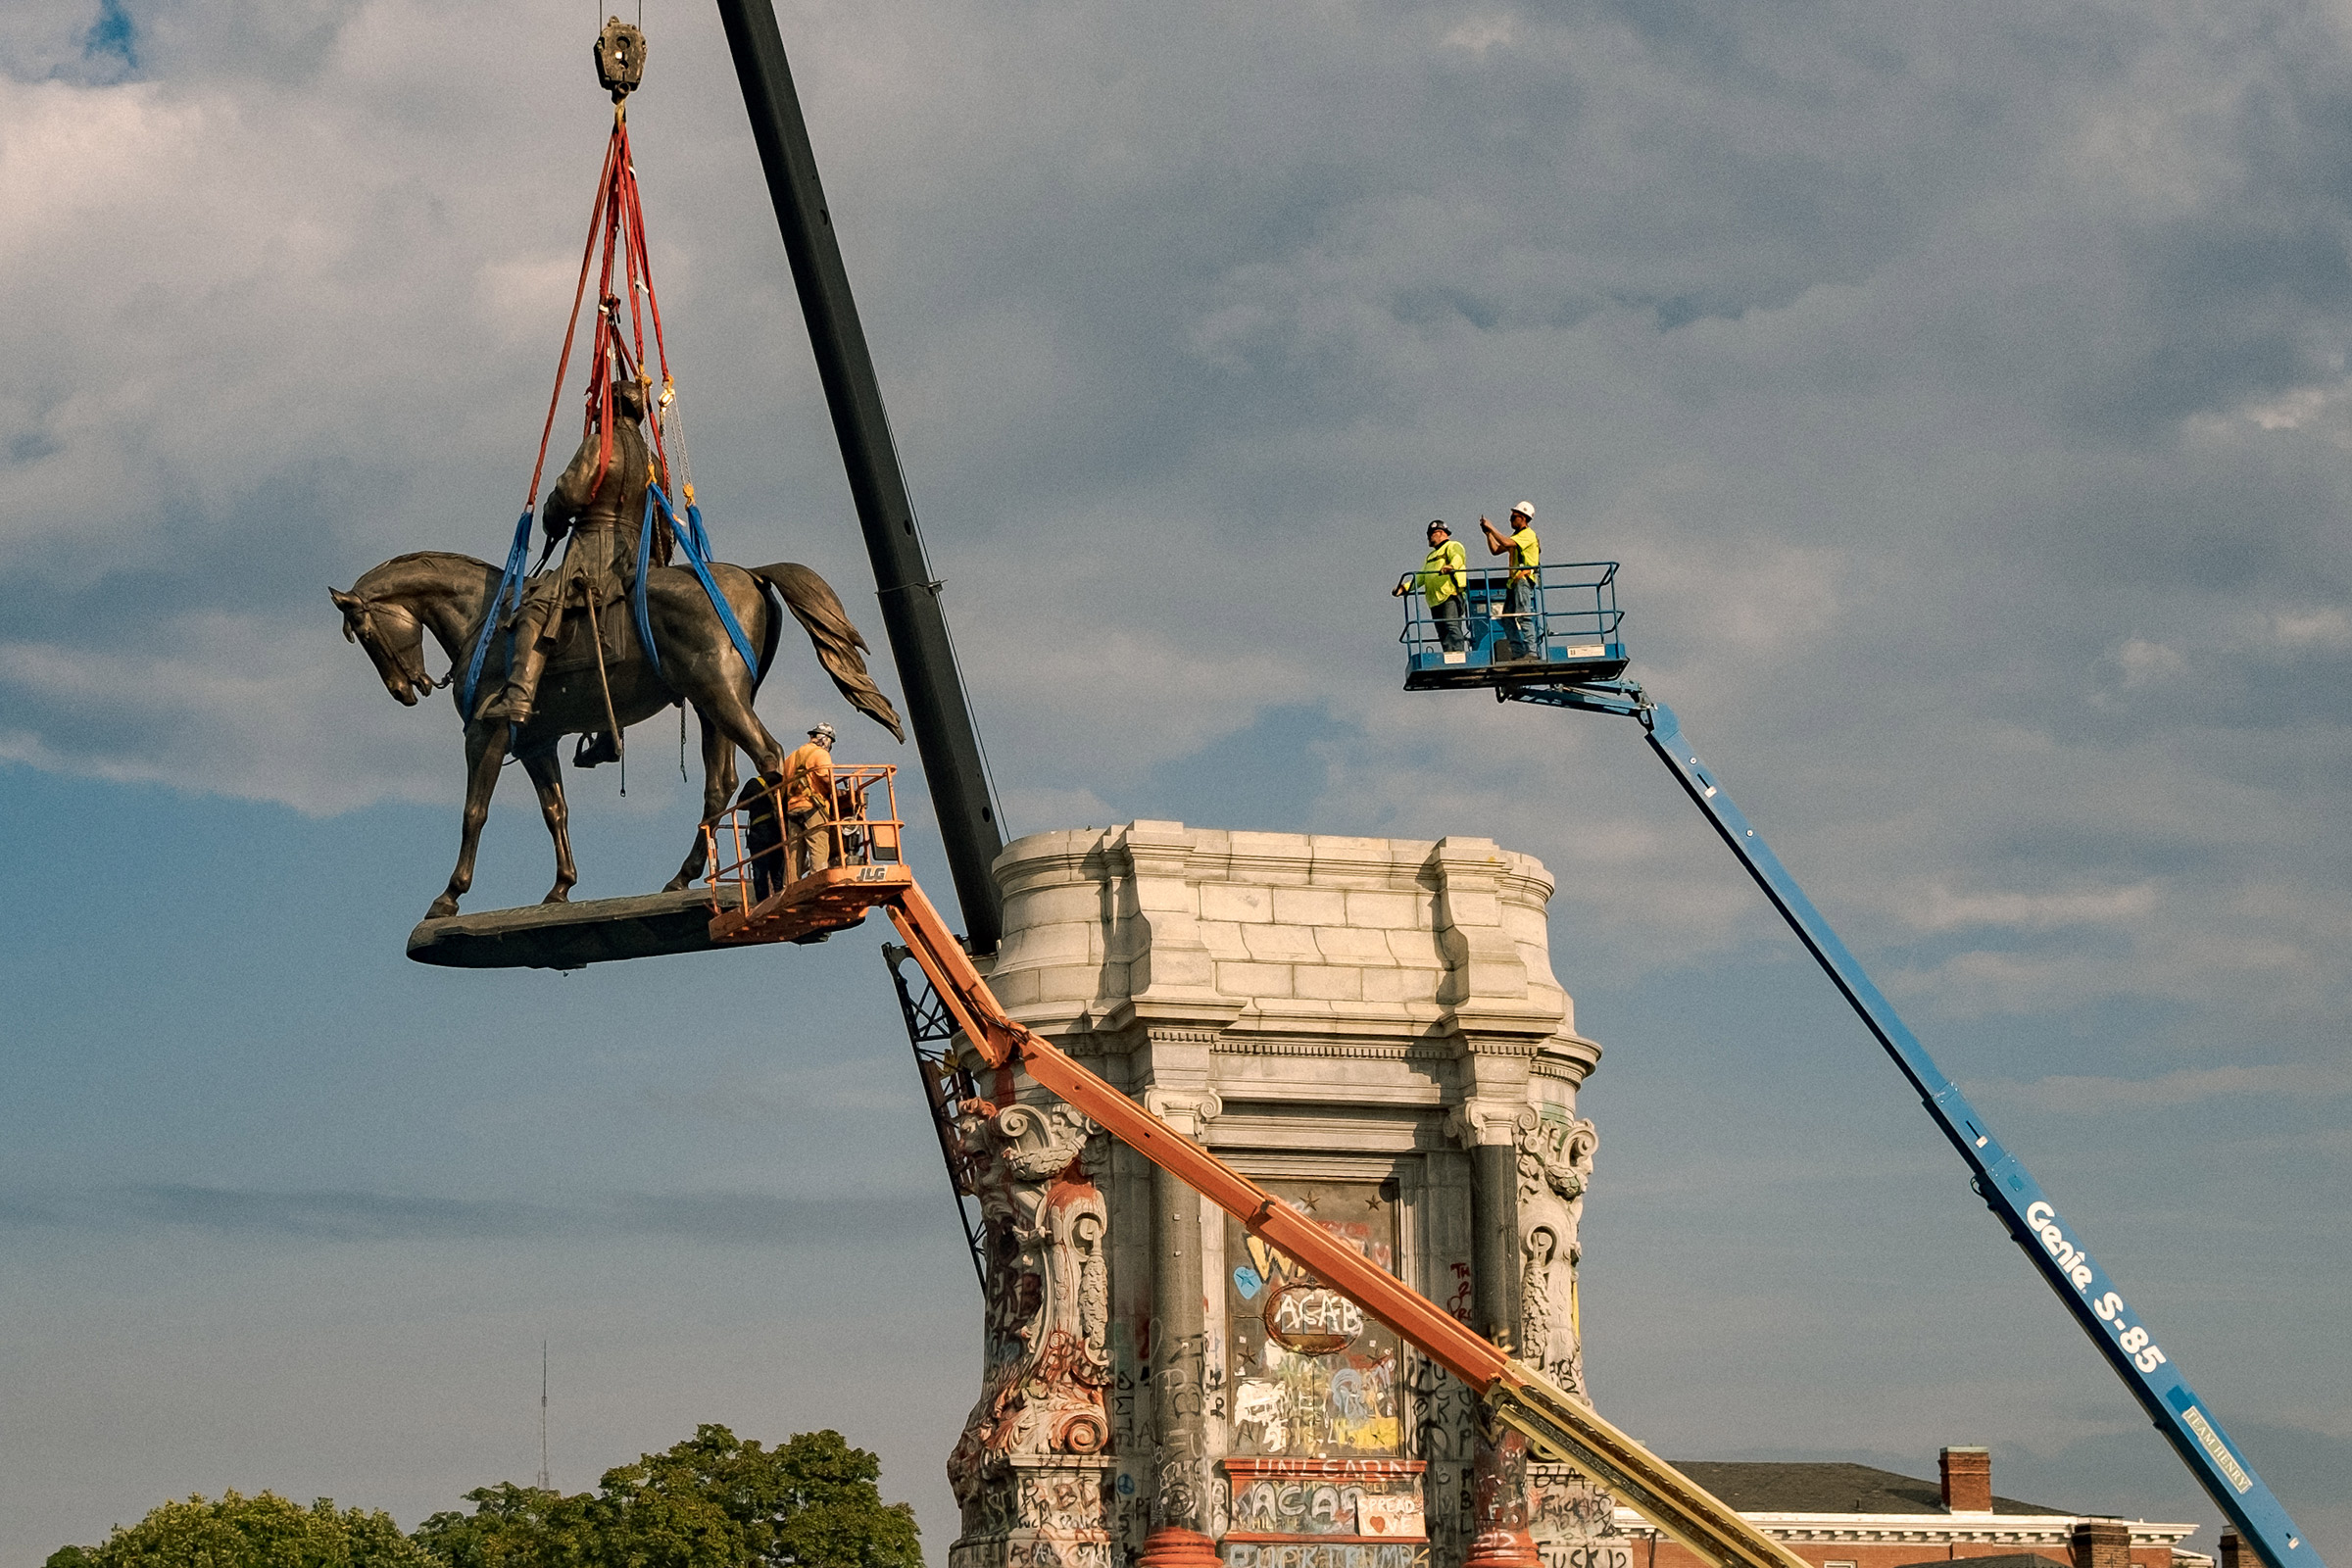 The statue of Robert E. Lee is lowered from its plinth at Robert E. Lee Memorial during its removal on September 8, 2021 in Richmond, Virginia. The statue has towered over Monument Avenue since 1890. (Amr Alfiky—National Geographic-Pool/Getty Images)